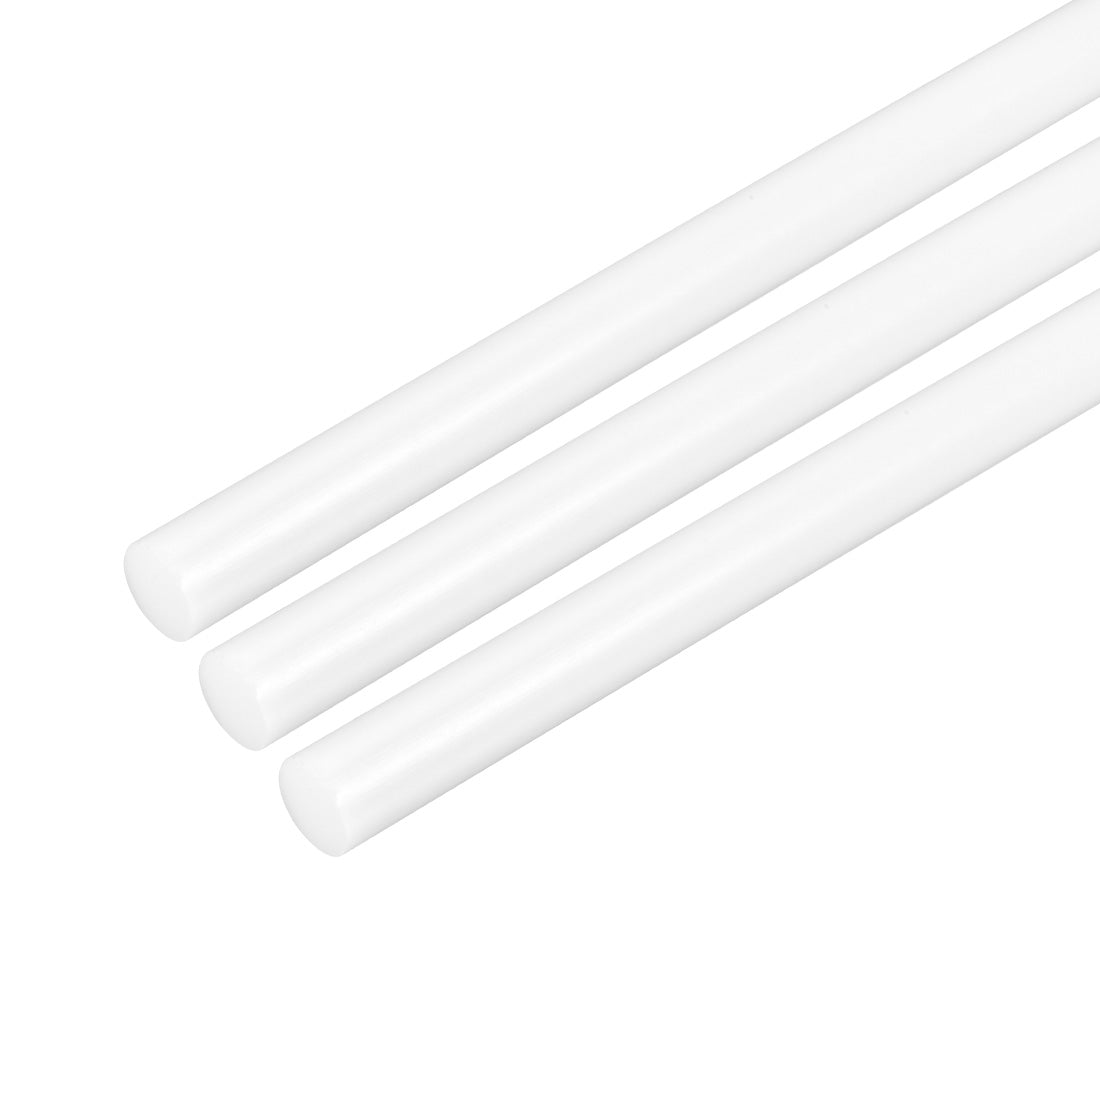 uxcell Uxcell Plastic Round Rod,6mm Dia 50cm White Engineering Plastic Round Bar 3pcs